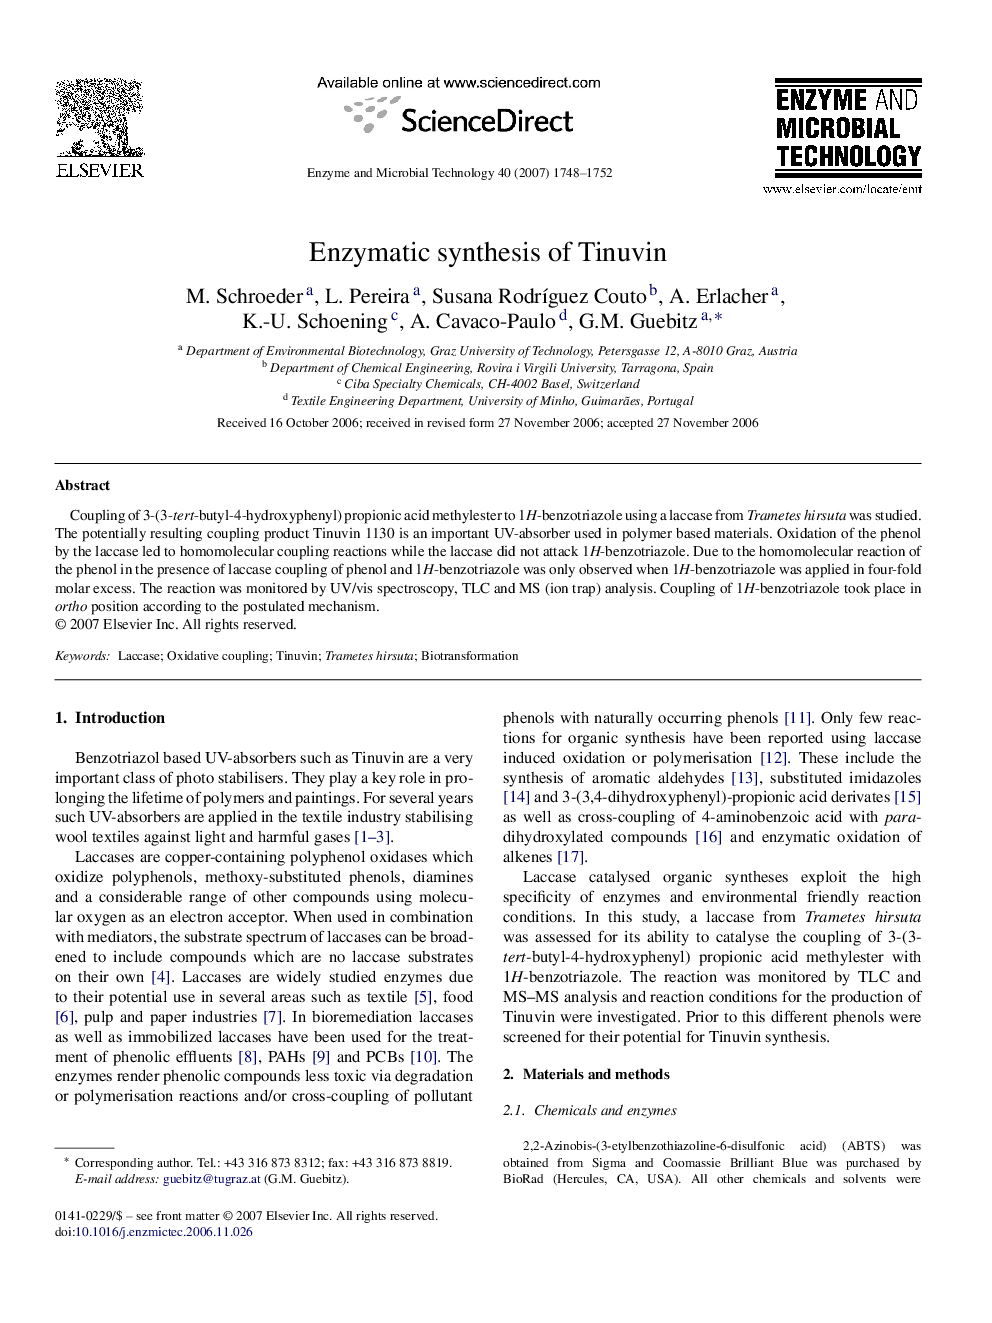 Enzymatic synthesis of Tinuvin